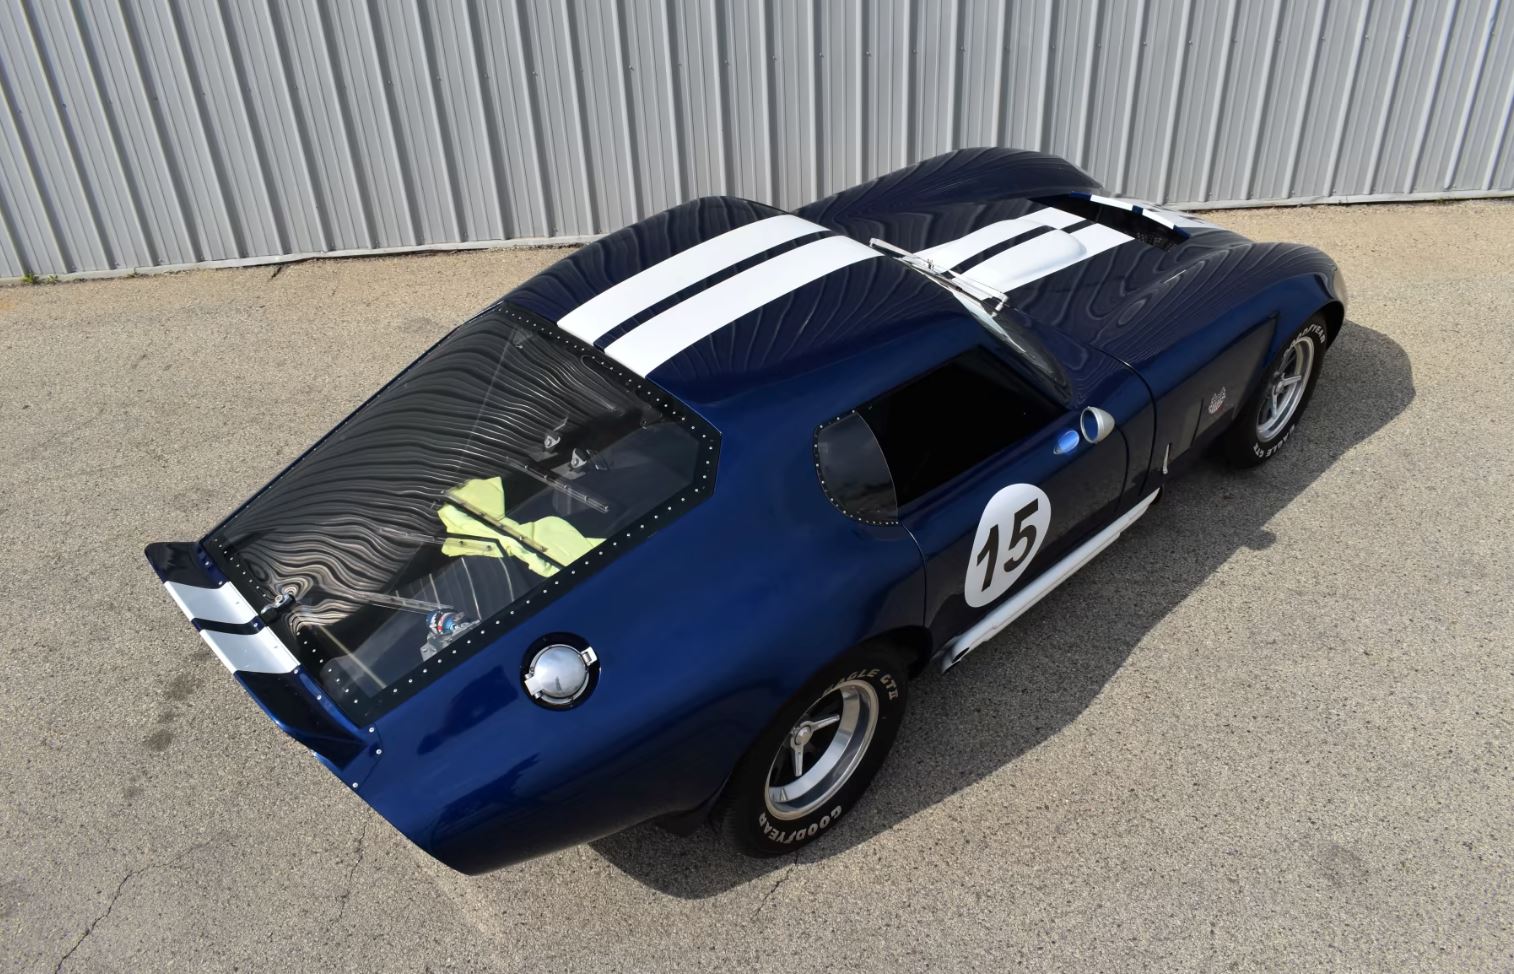 Ford factory five shelby daytona coupe replica 0fuou1lpqalwjqrpdb1t 